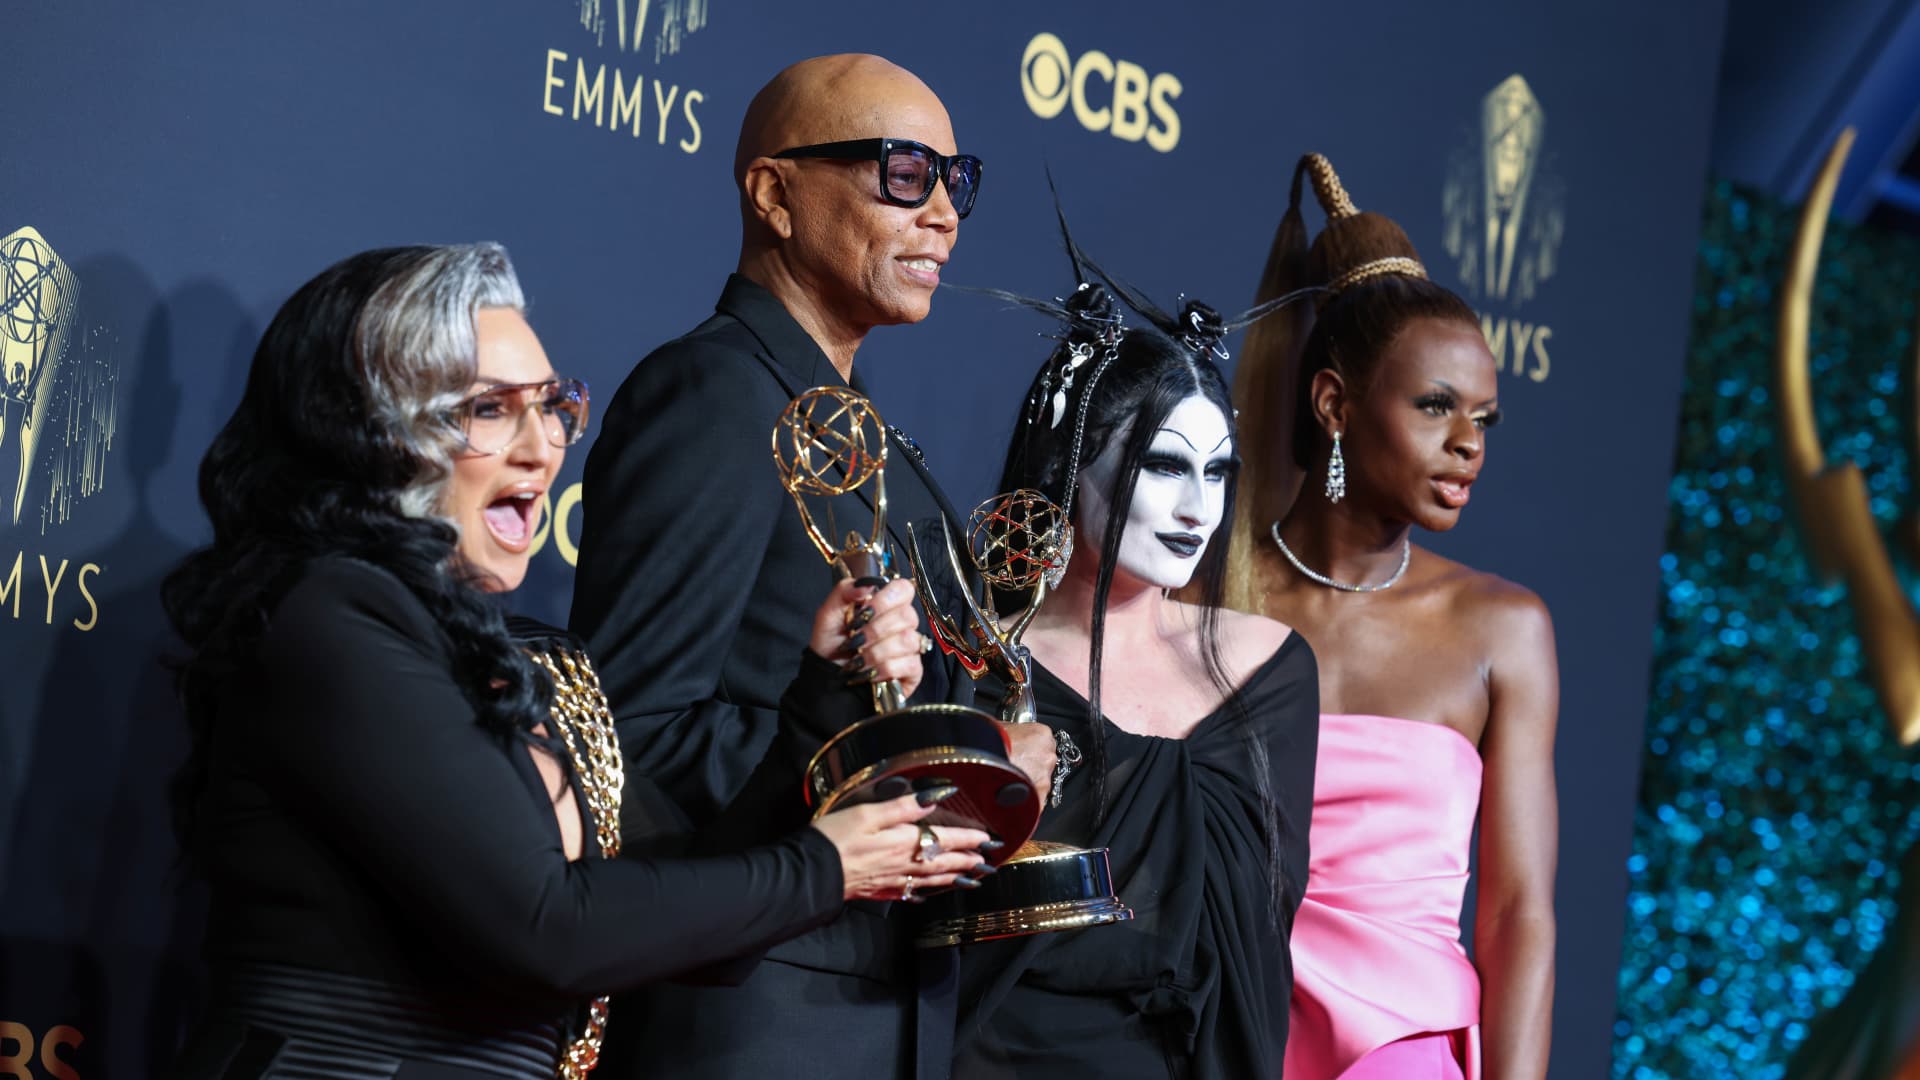 (L-R) Michelle Visage, RuPaul, Gottmik, and Symone, winners of the Outstanding Competition Program award for 'RuPaul's Drag Race,' pose in the press room during the 73rd Primetime Emmy Awards at L.A. LIVE on September 19, 2021 in Los Angeles, California.